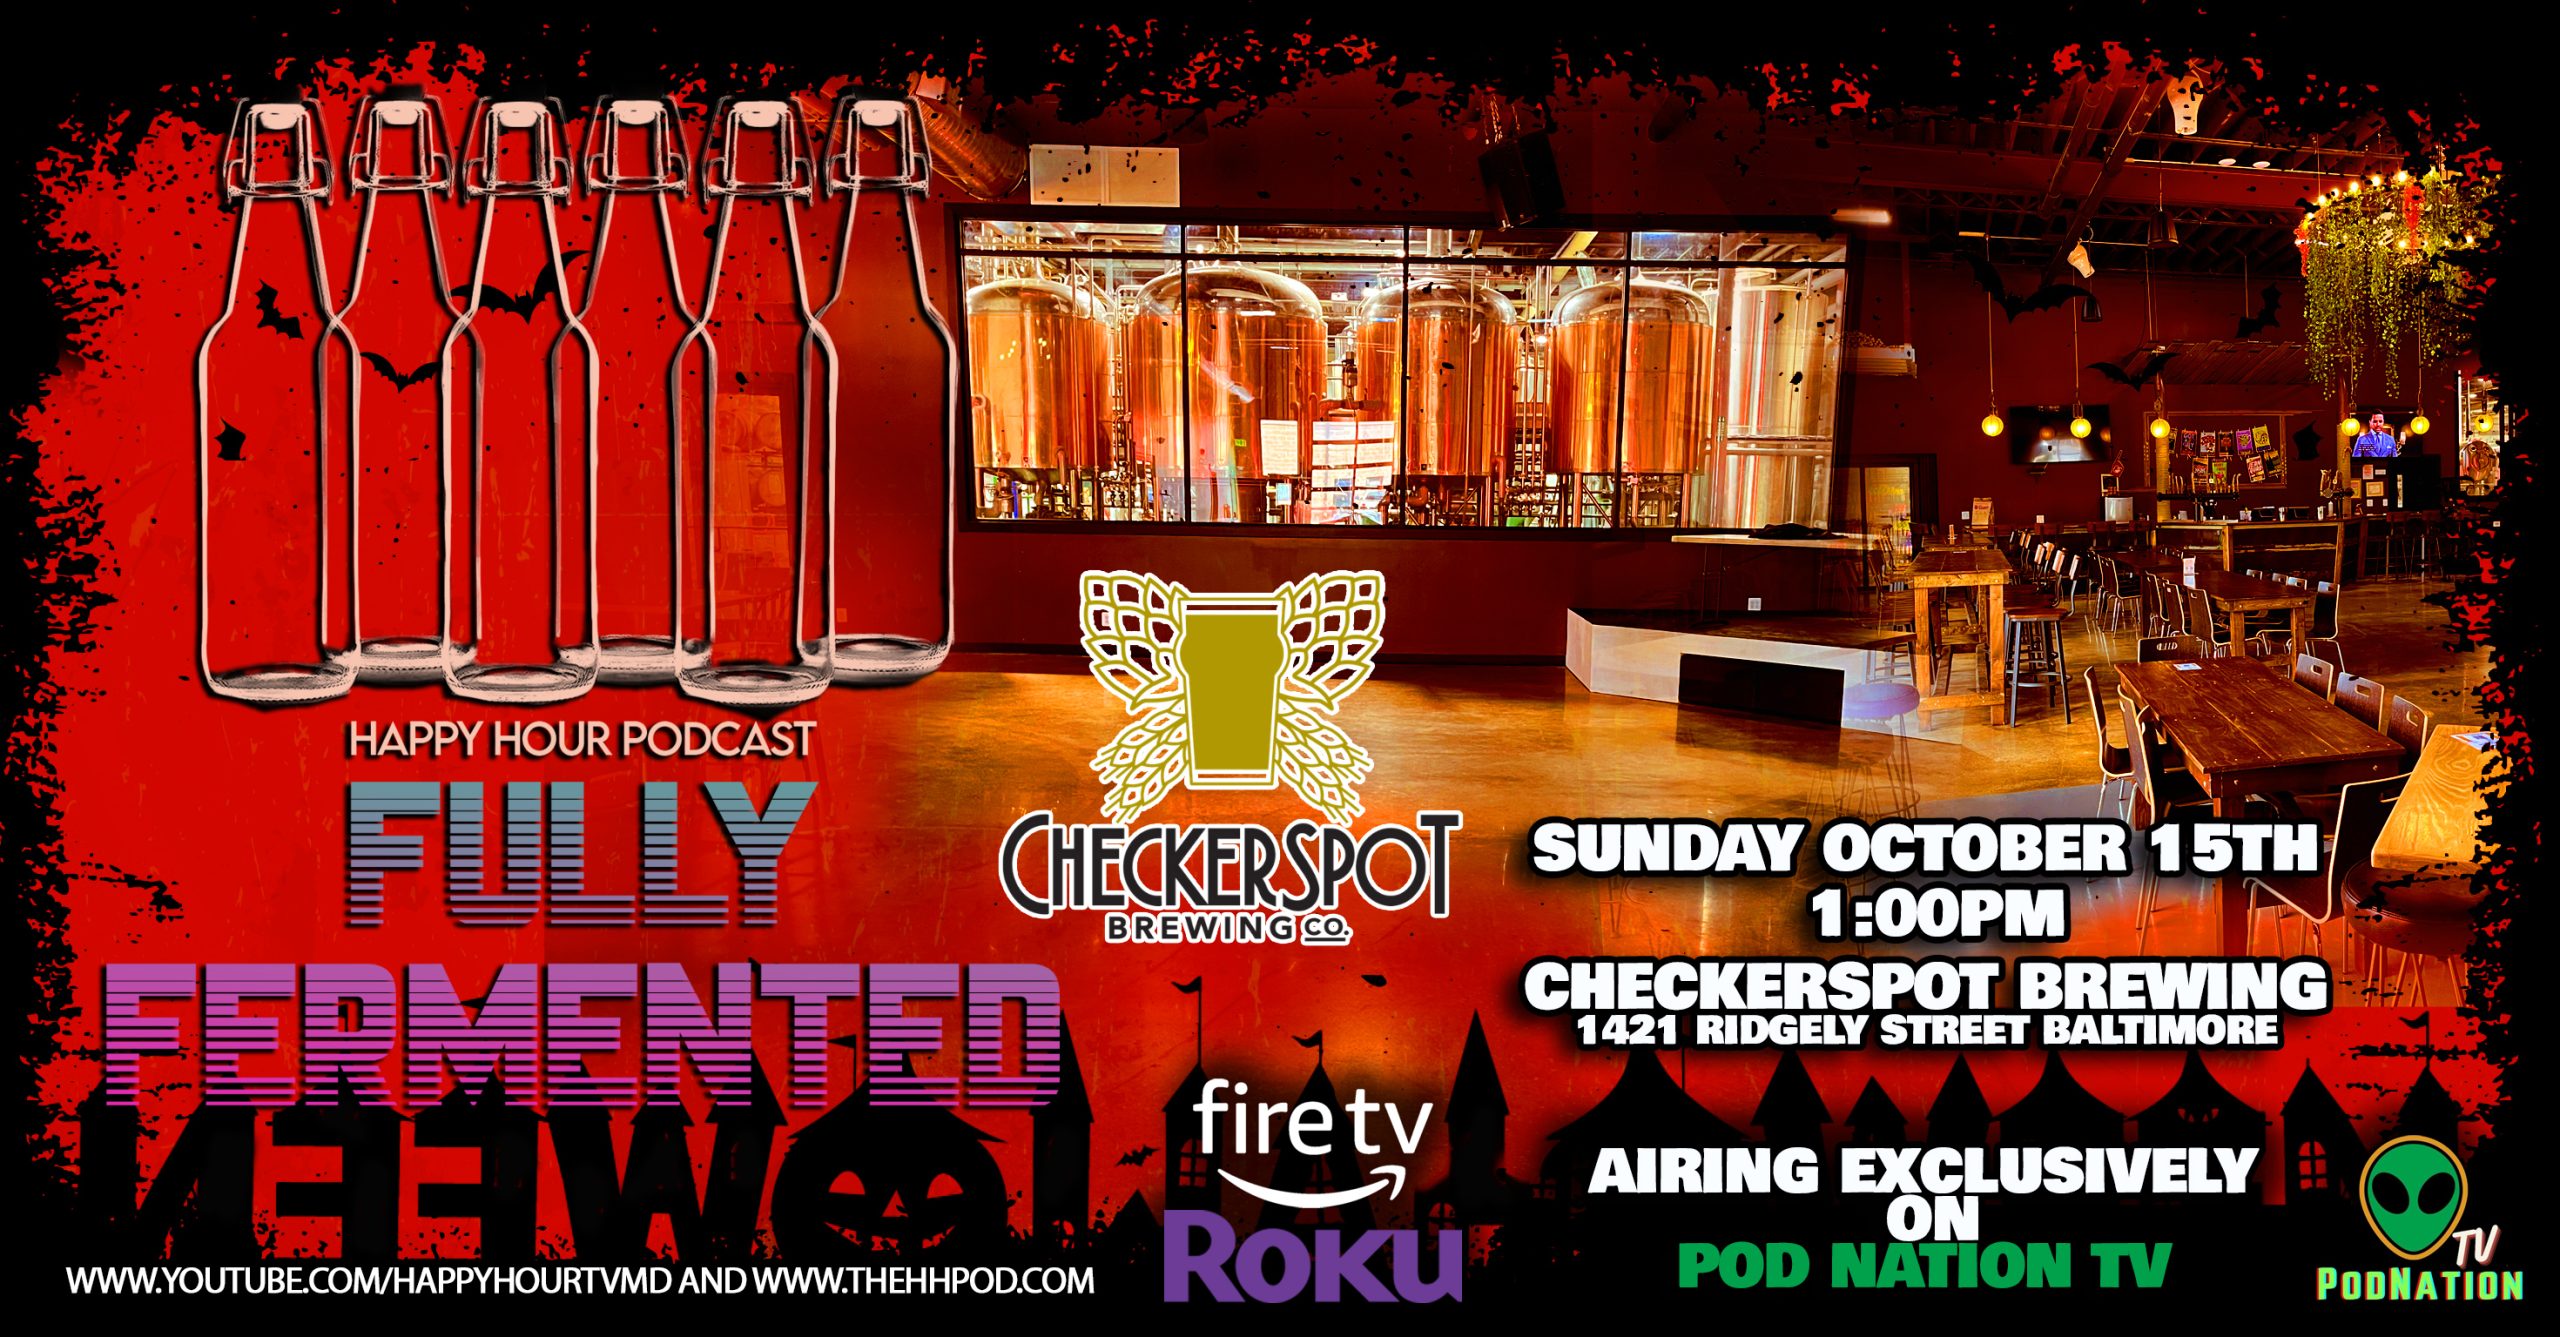 Featuring  Checkerspot Brewing Company
Now Available on Roku & Fire TV
Pod Nation Exclusive